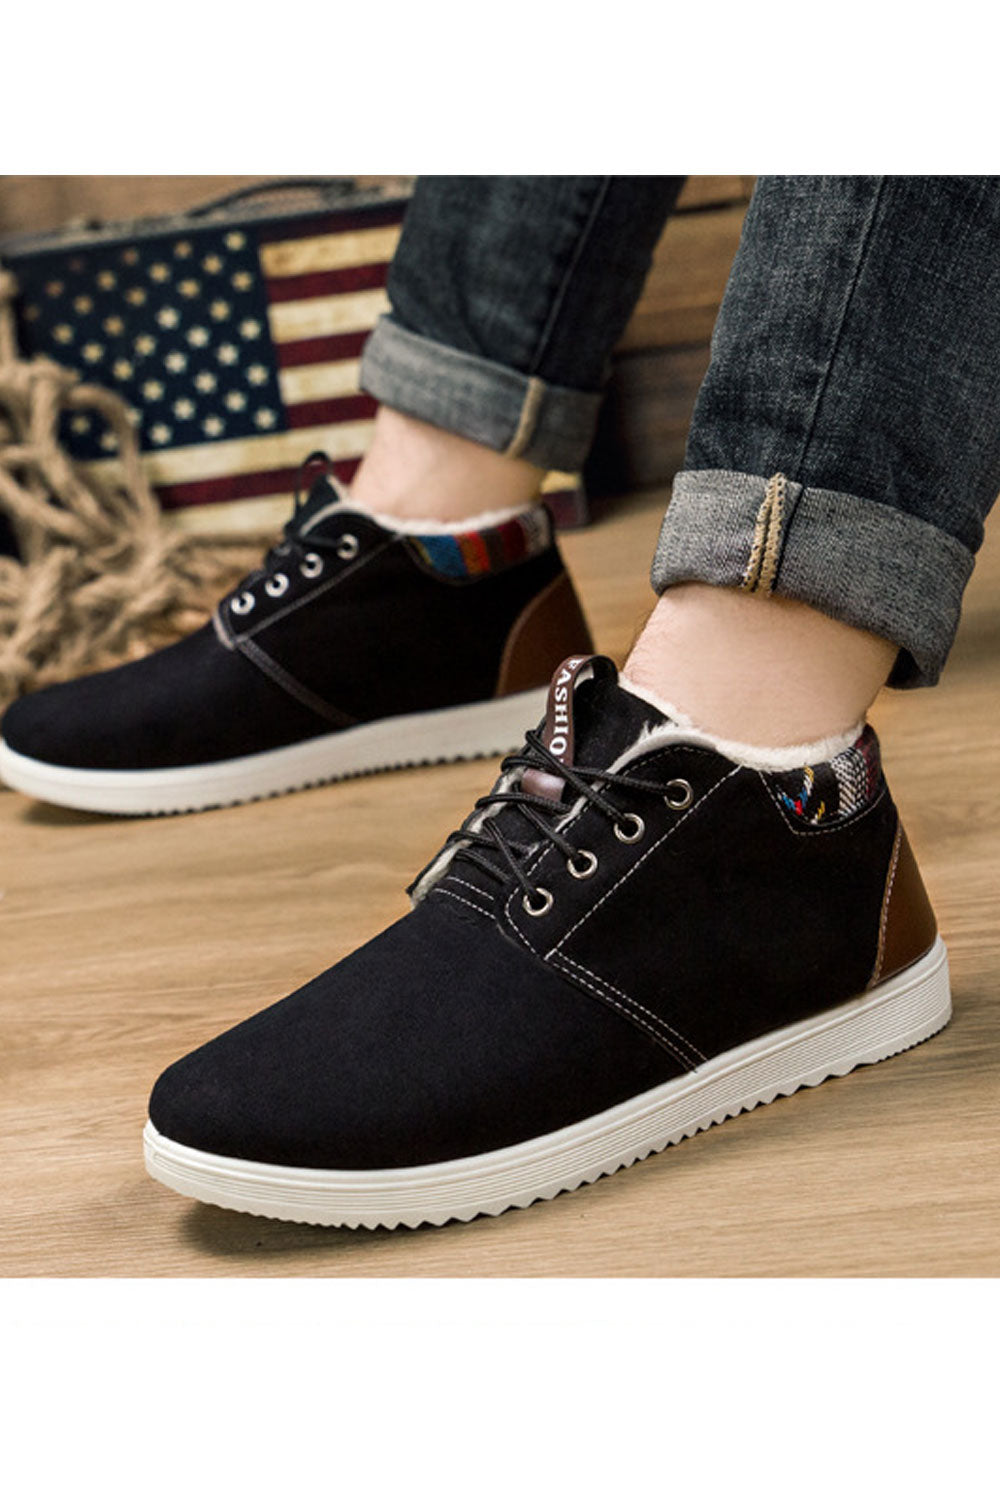 Men Awesome Solid Colored Round Head Furr Inner Collar Flat Rubber Soled Casual Winter Boots - MSC50107